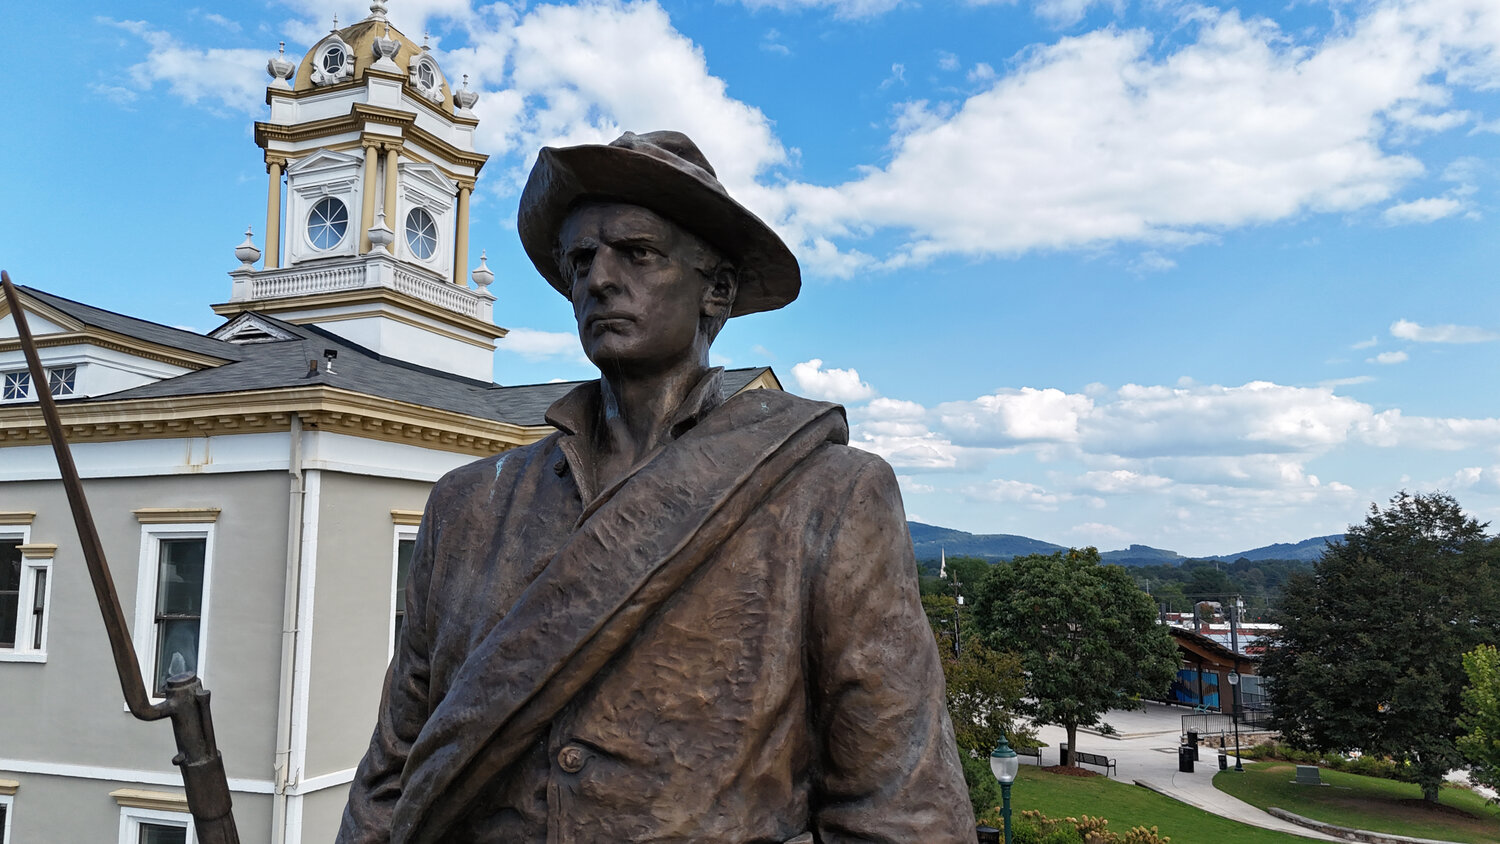 The face of the Confederate soldier who has stood watch over downtown Morganton on the Historic Courthouse Square for more than a century.